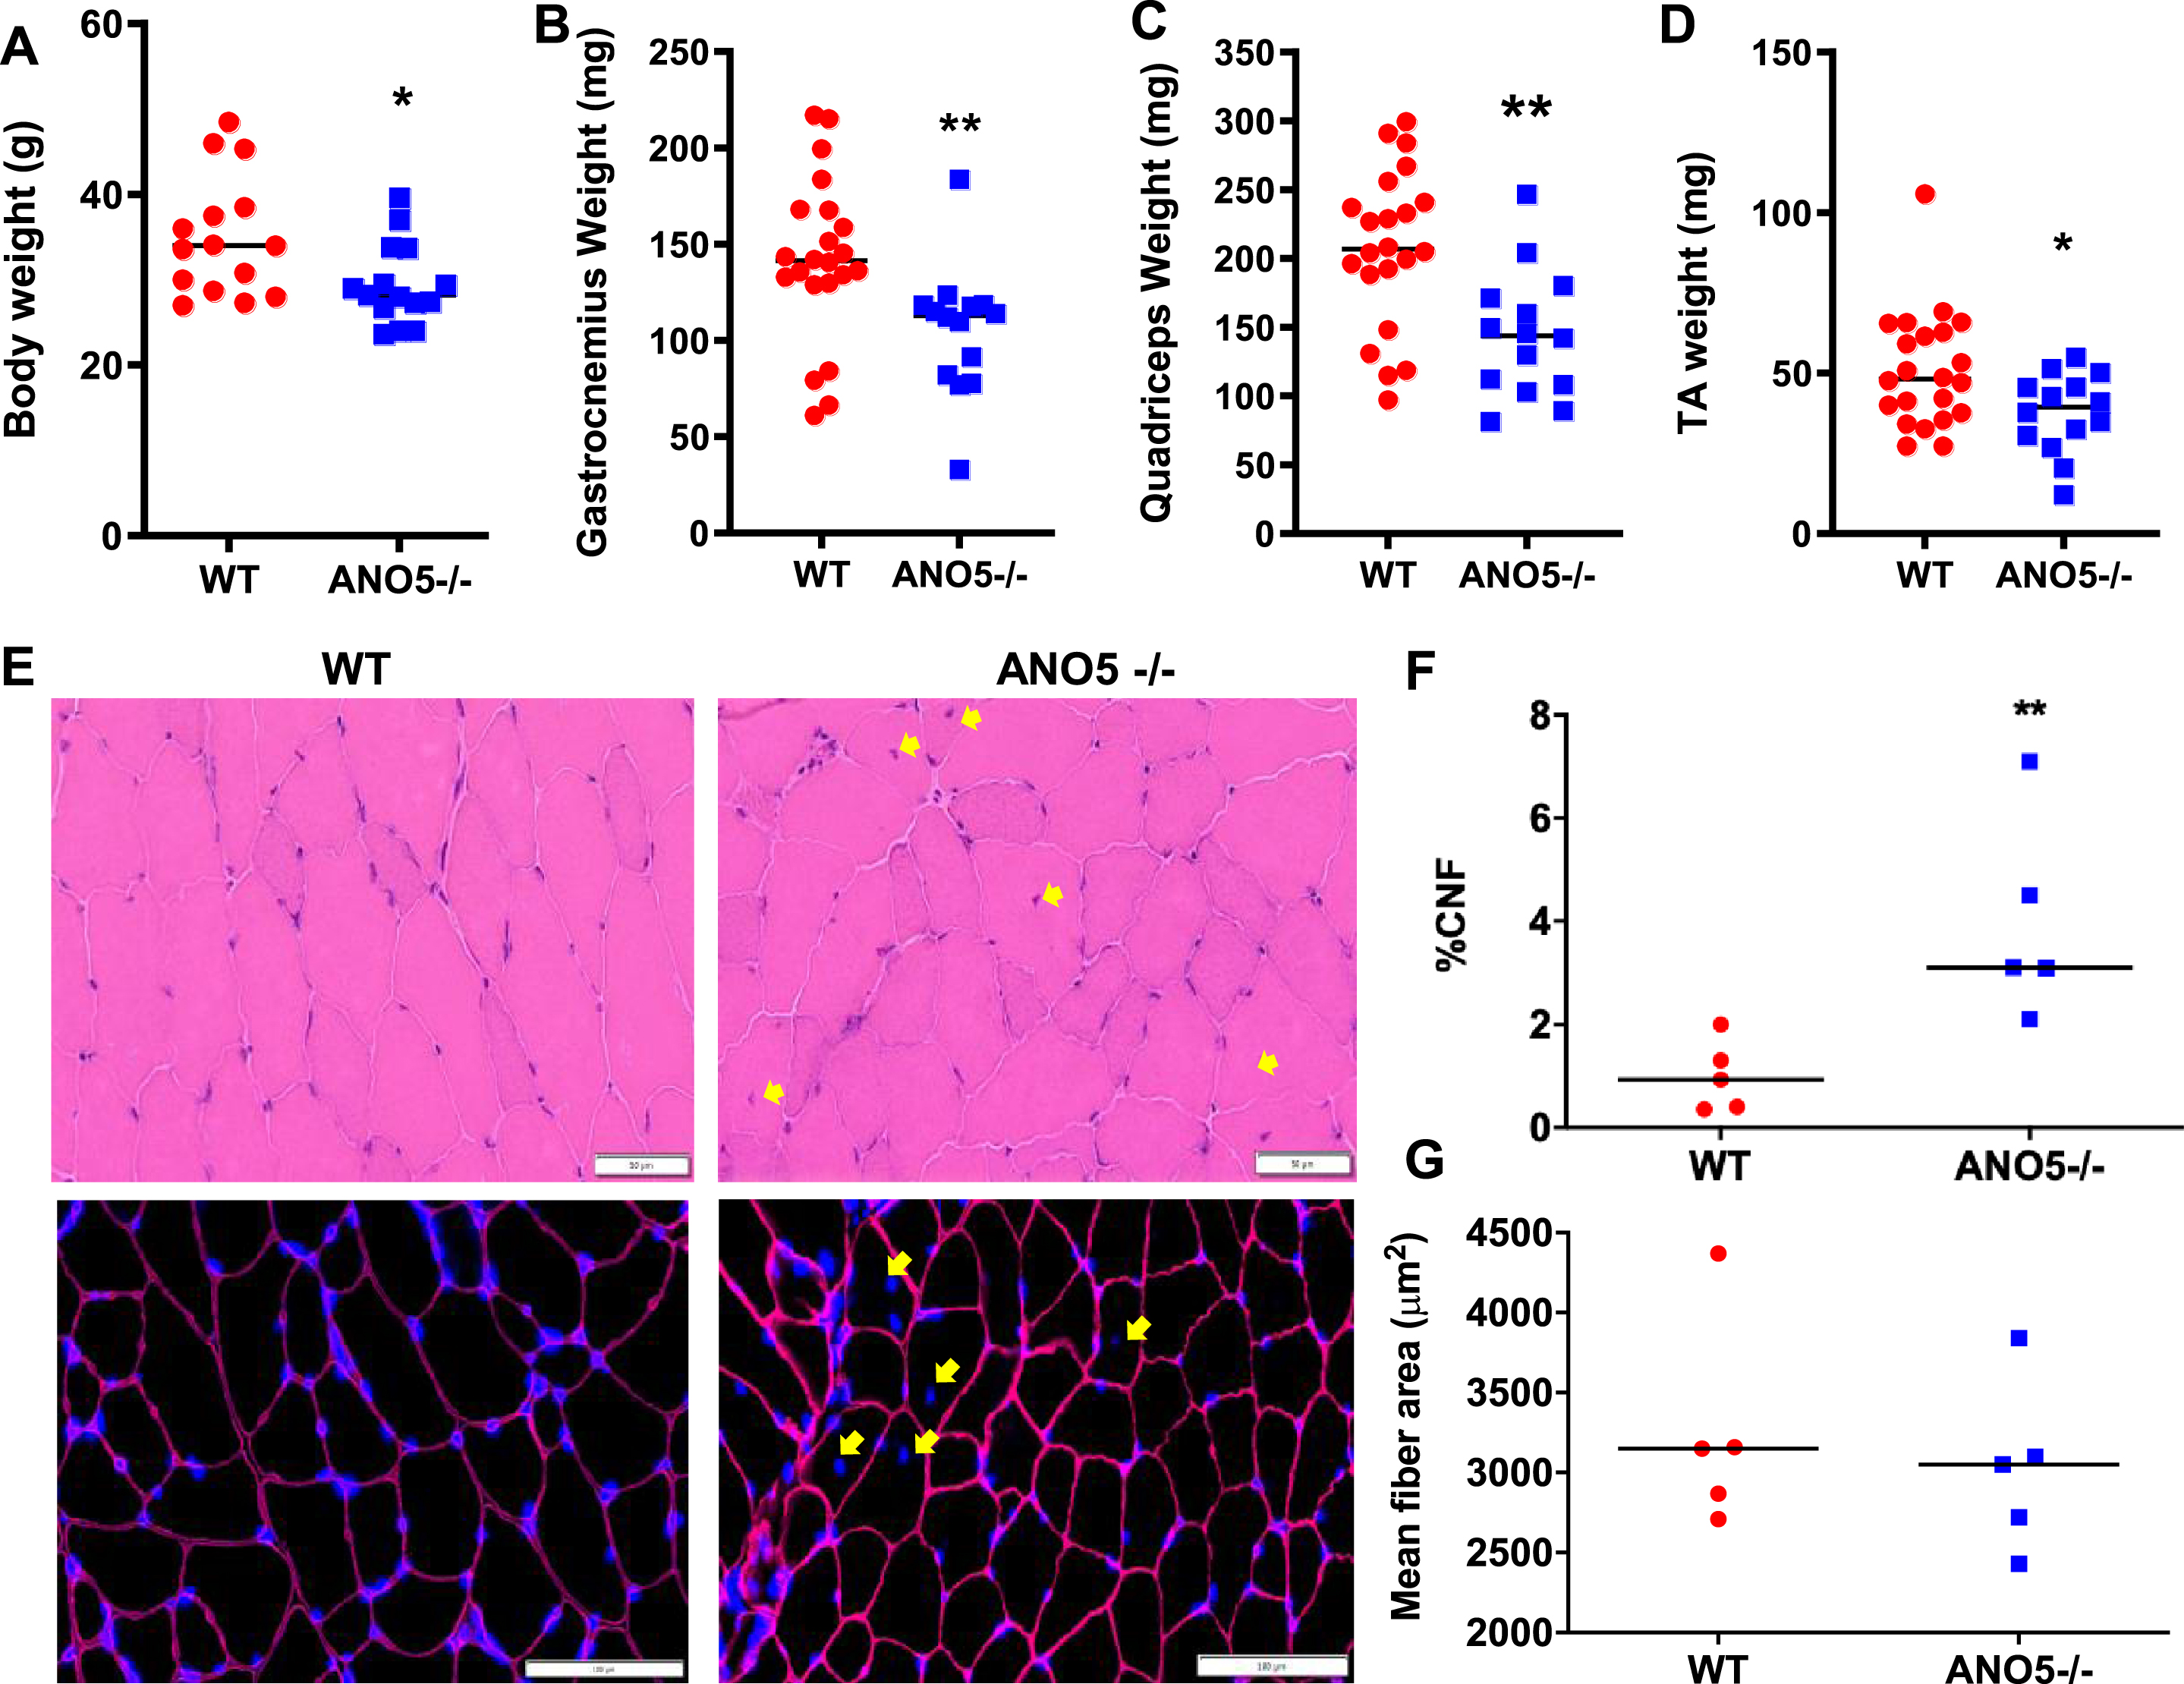 Effect of ANO5 deficit on muscle size and histopathology. Plots showing (A) body weight and weights of (B) Gastrocnemius, (C) Quadriceps, and (D) TA muscles. Each dot represents an individual mouse/muscle. Images showing cross sections of quadriceps muscle (E) stained with H&E (top) and for nuclei (DAPI) and basement membrane (Laminin immunostain) (bottom). Yellow arrows mark the centrally nucleated fiber (CNF) and these were quantified to measure (F) proportion of CNFs and (G) myofiber cross-sectional areas. Each dot represents value averaged from multiple cross sections per muscle, black line represents the median value of the distribution. Scale bars are 50 μm (top) and 100 μm (bottom). p values are measured by unpaired Mann-Whitney t test and indicated by *p < 0.05; **p < 0.01; A–D (n > 15), F, G (n = 5).